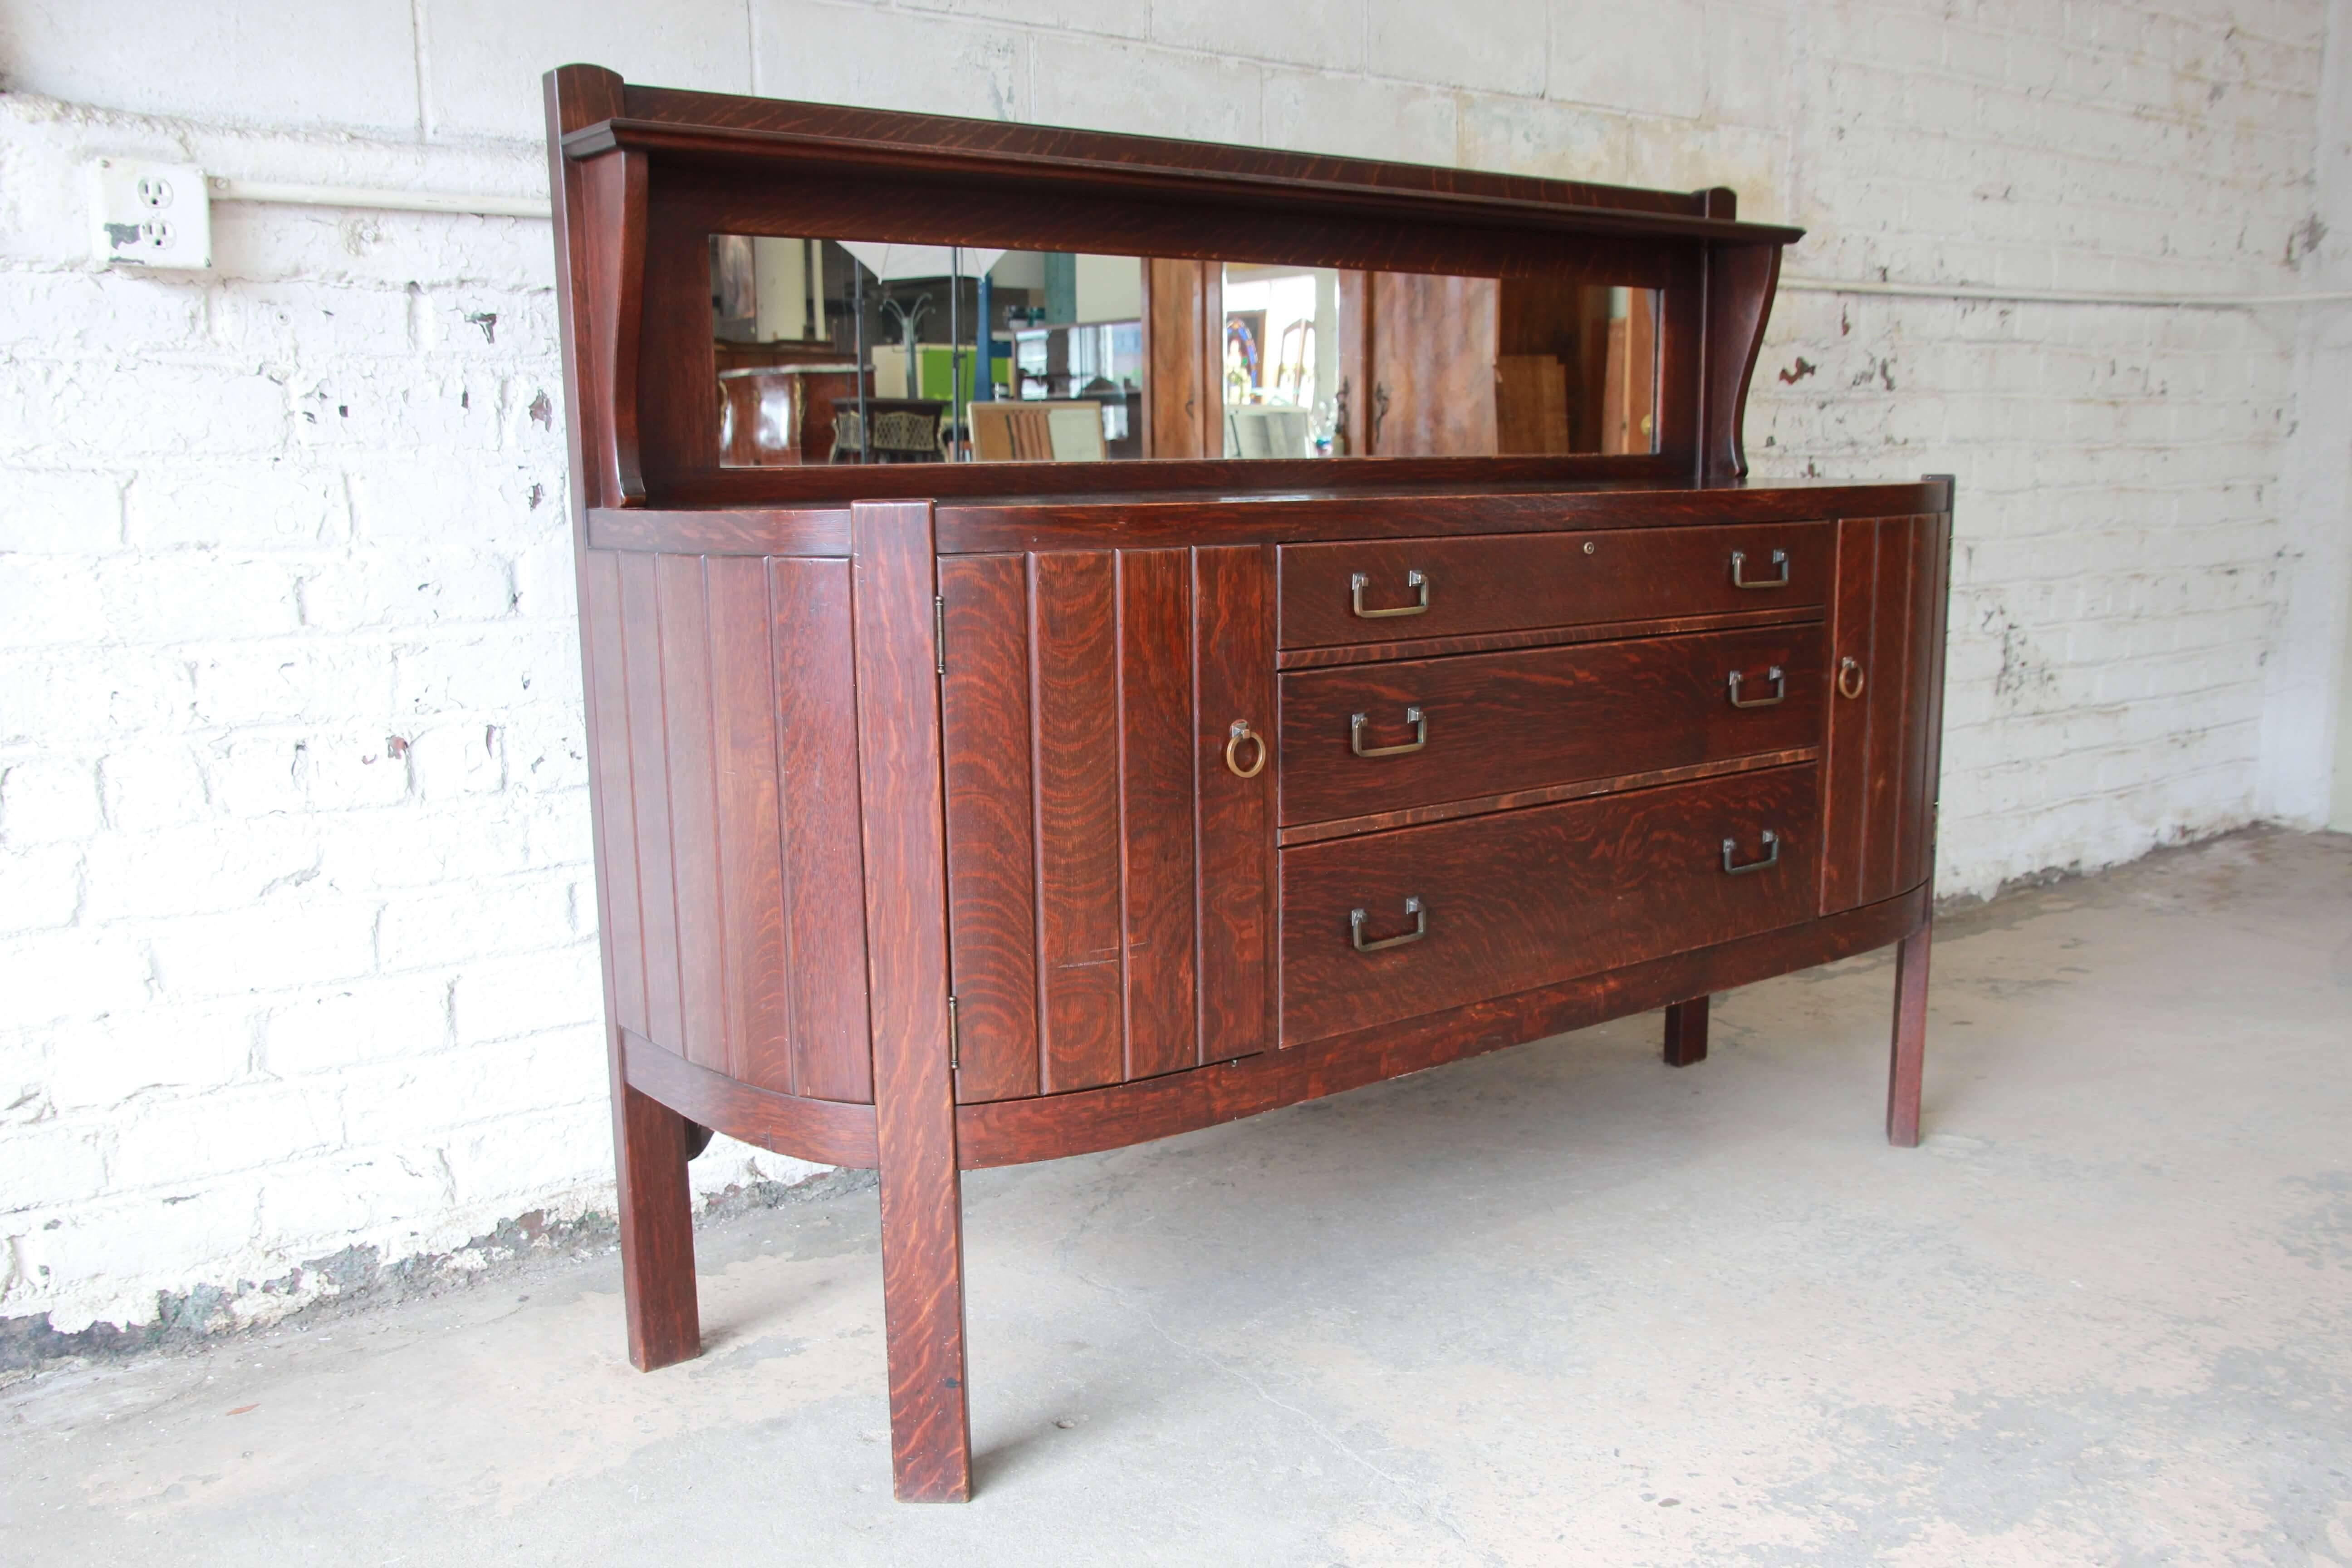 Early 20th Century Antique Mission Oak Sideboard by Grand Rapids Chair Co., circa 1910